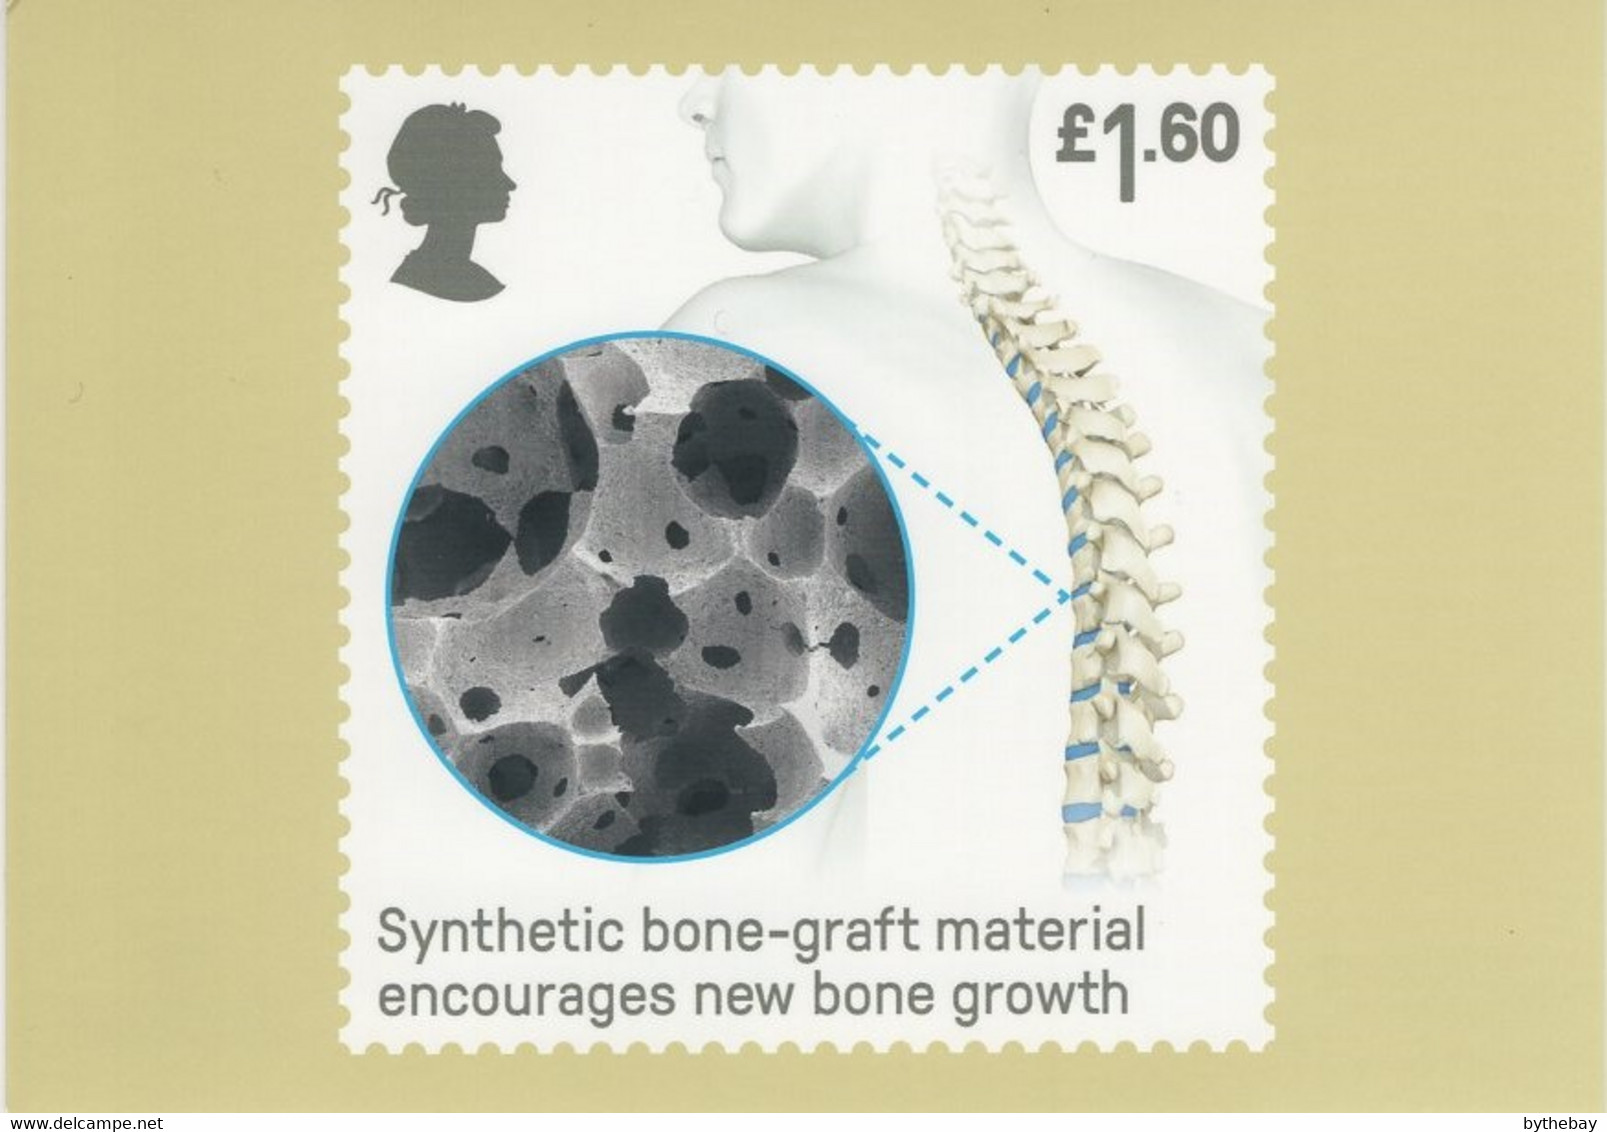 Great Britain 2019 PHQ Card Sc 3844 1.60pd Synthetic Bone-graft Material - Cartes PHQ